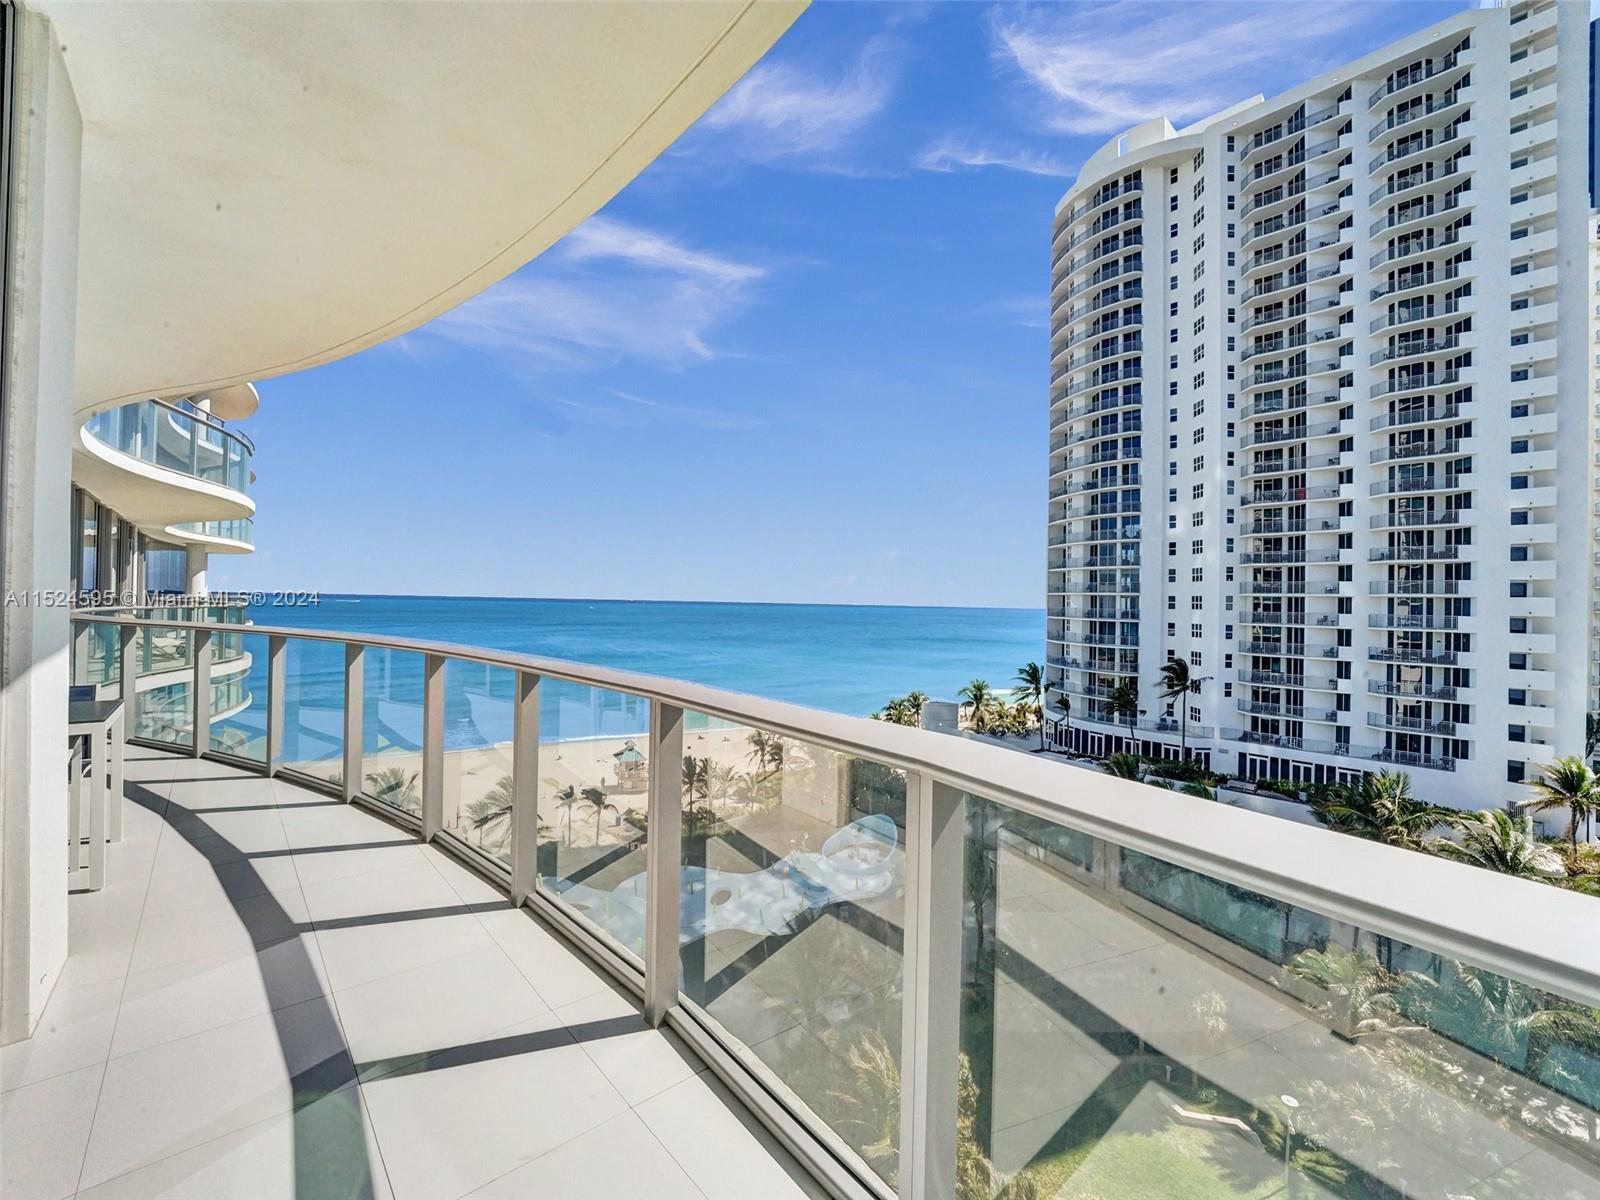 Exclusive opportunity at the Chateau beach Residences, Sunny Isles Beach FL. Fully furnished 2 bedroom+ den and 2 baths unit offers breathtaking views of the Atlantic Ocean, Intracoastal, and Miami skyline. High-end finishes, Miele and Subzero appliances, and exquisite lighting. Chateau Beach is not just a home; it's a lifestyle. Enjoy exclusive amenities like restaurant, spa, Cigar Bar w/ humidor boxes, and a Wine Lounge. Stay active in the ocean-view Fitness Center or unwind in the Home Theater, Massage room and hair salon for ultimate relaxation. Benefit from 24-hour concierge and valet services. Kids playroom. Live in a residence that defines elegance and sophistication. Welcome to a world where luxury is limitless, and every detail speaks to the art of living well.